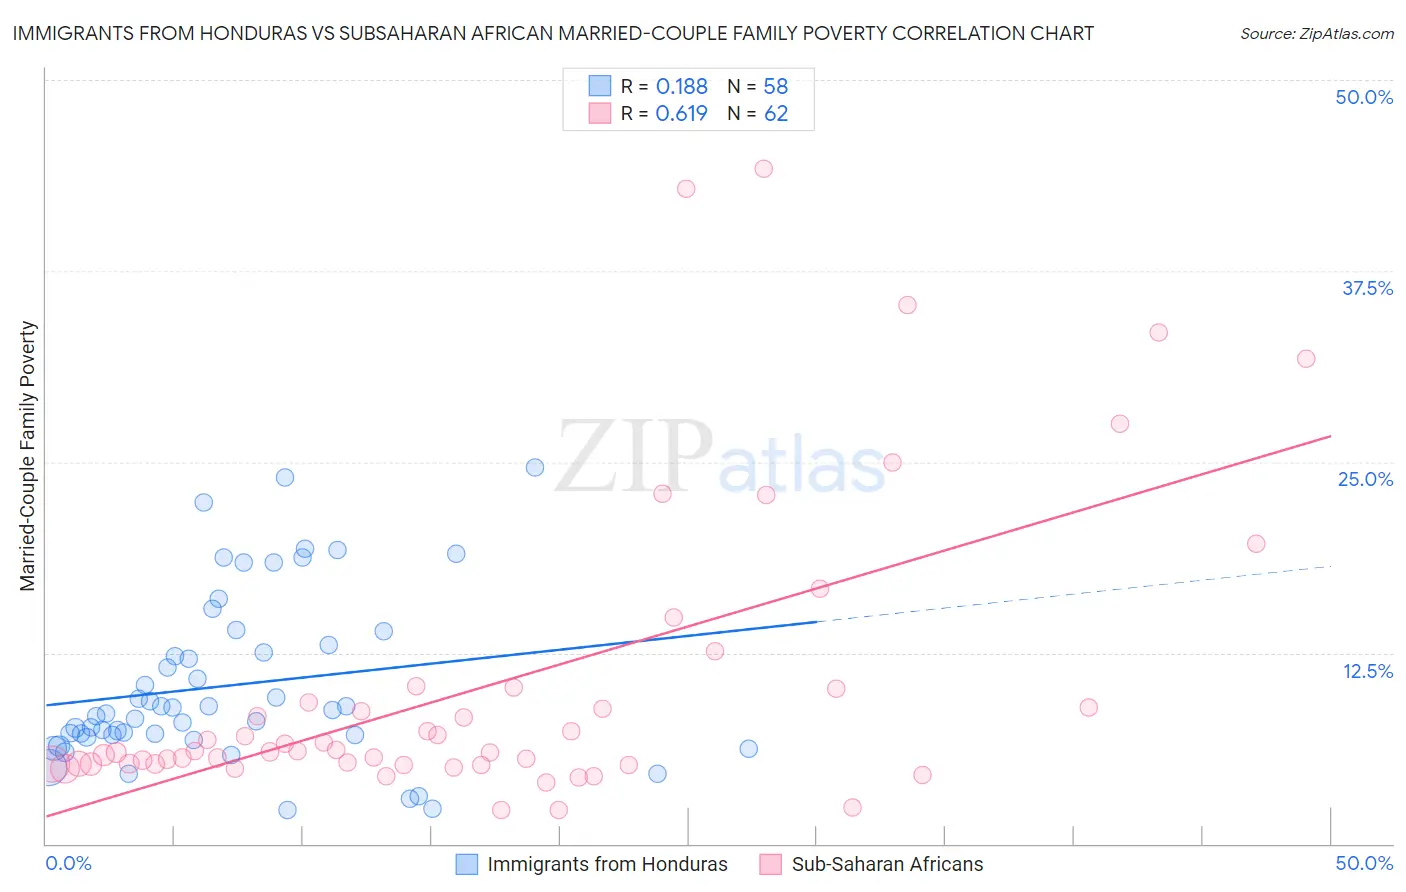 Immigrants from Honduras vs Subsaharan African Married-Couple Family Poverty